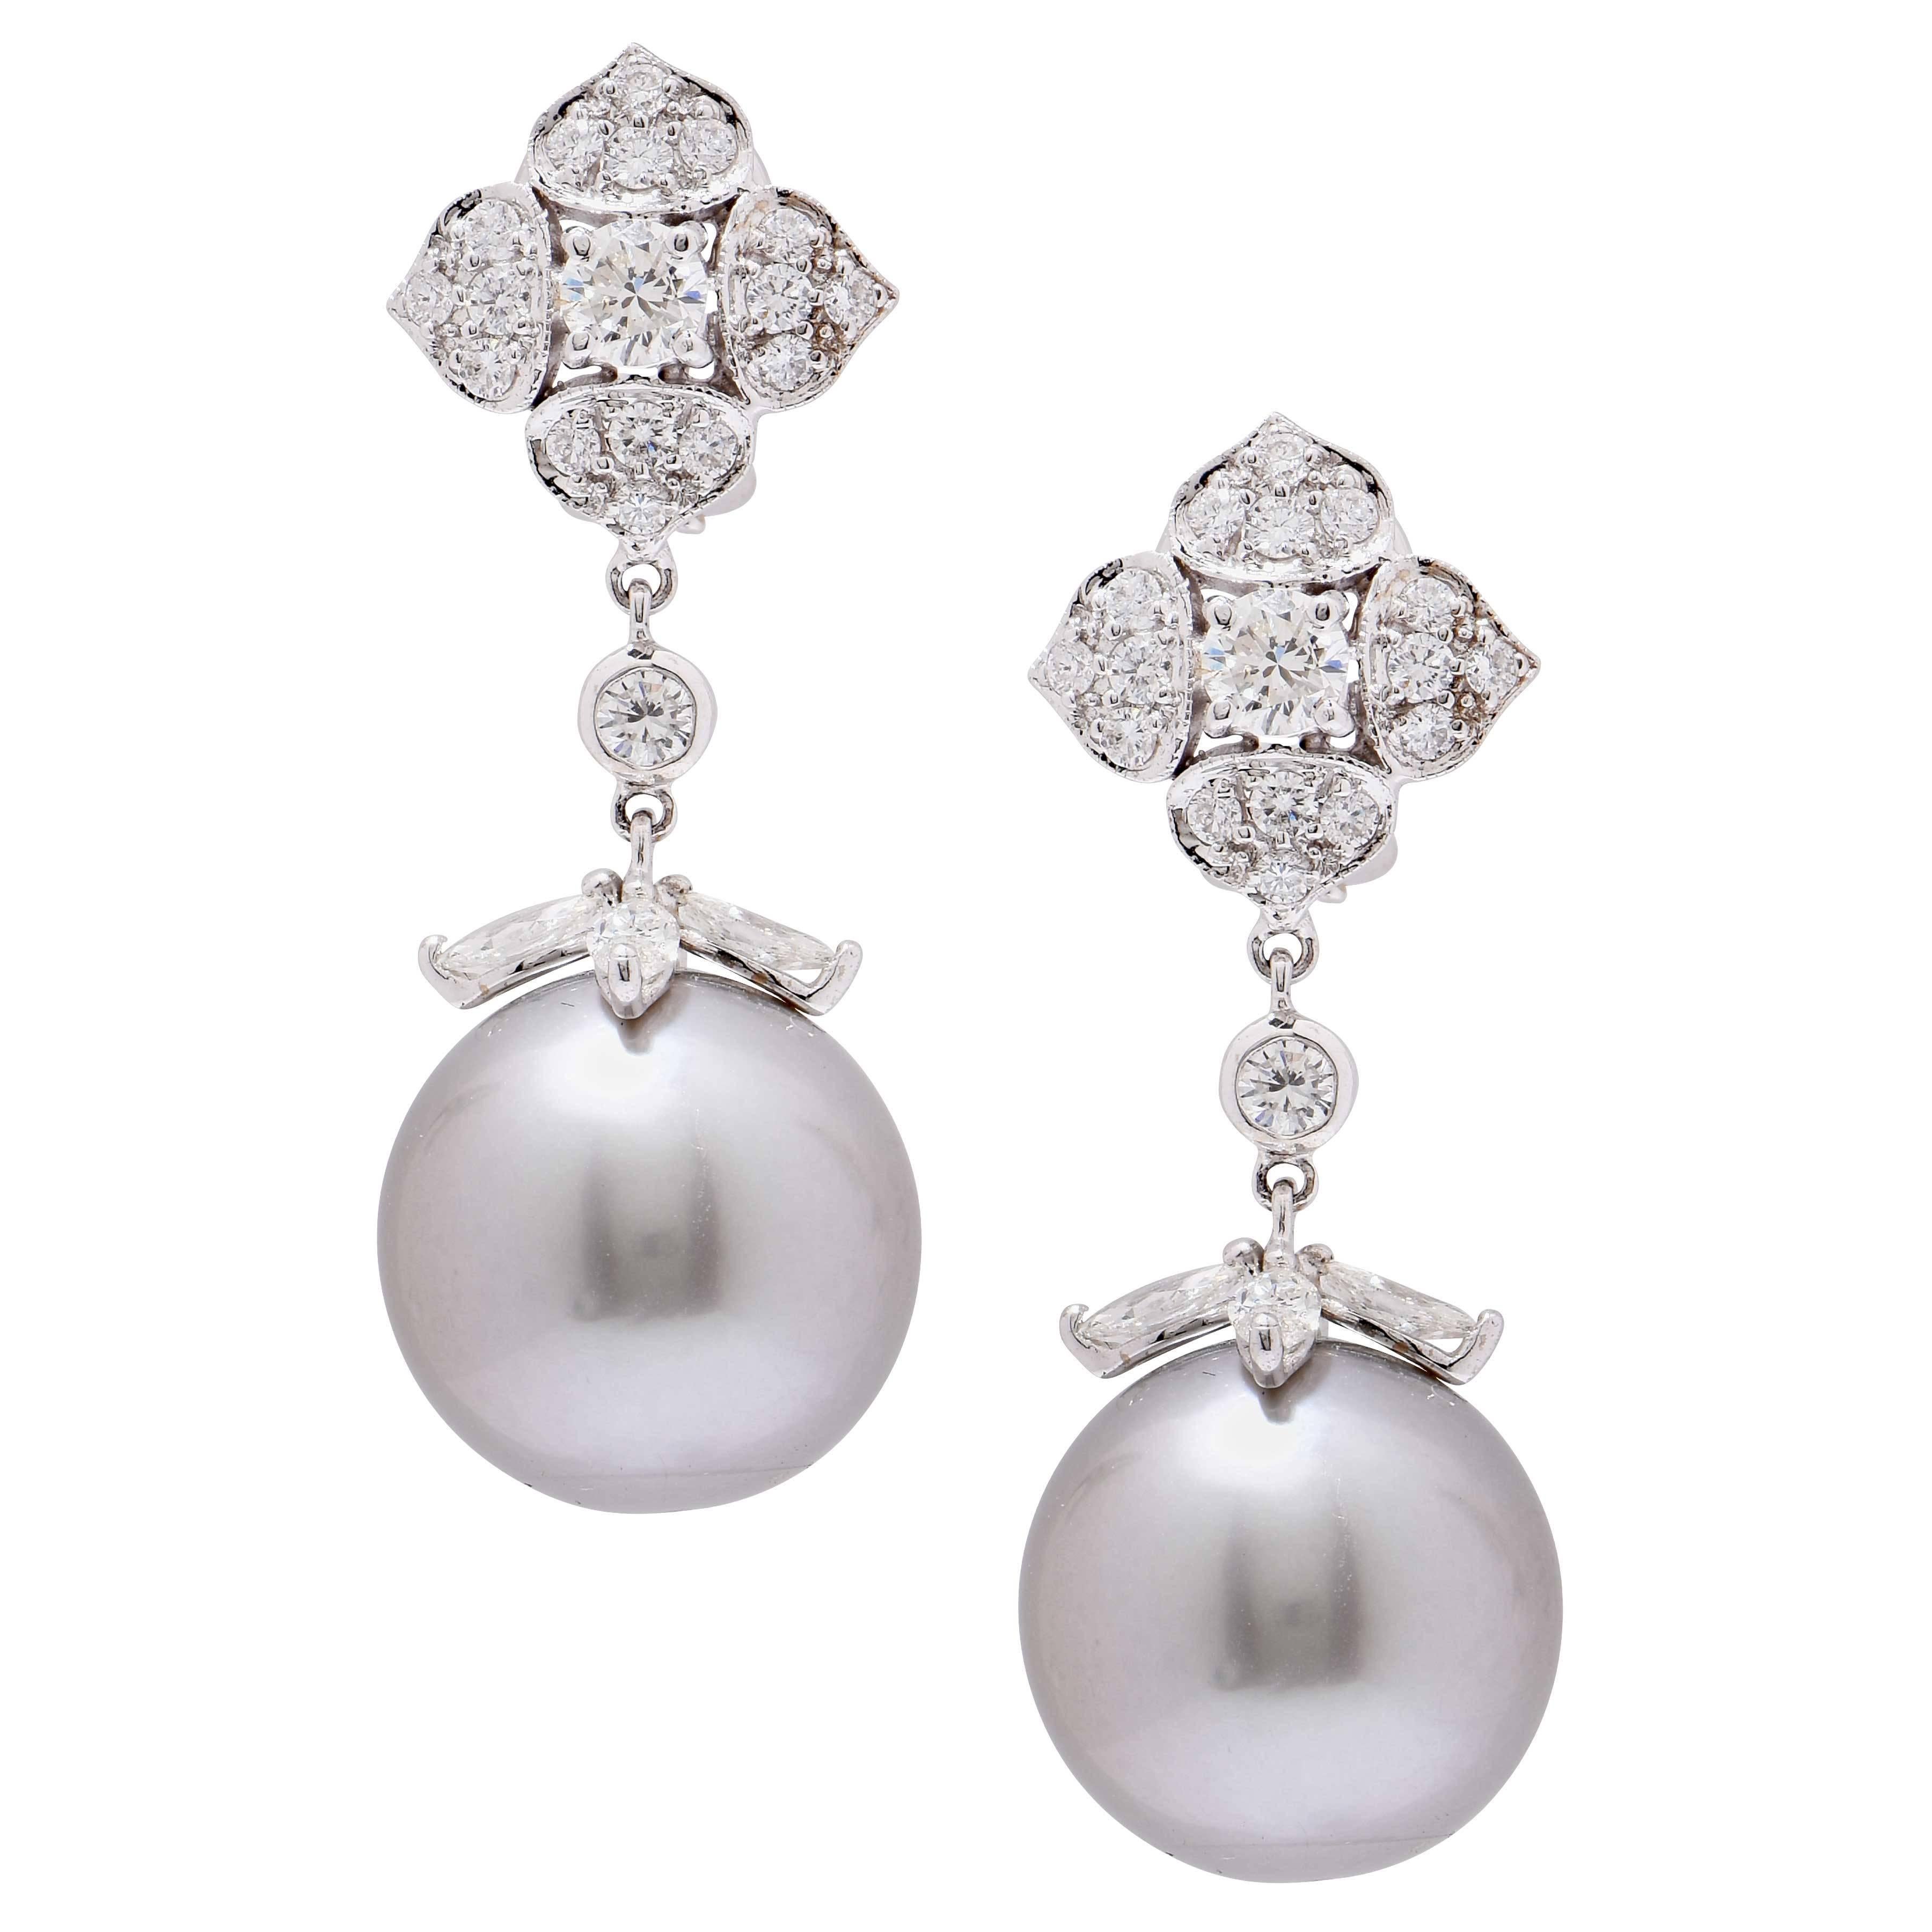 14.8 MM Gray Tahitian Pearl and Diamond Earrings with detachable seed pearl drops set in 18 karat white gold. This wonderful pair of earrings feature 110 round cut diamonds with an estimated total weight of 3.15 carats as well as 8 marquise cut